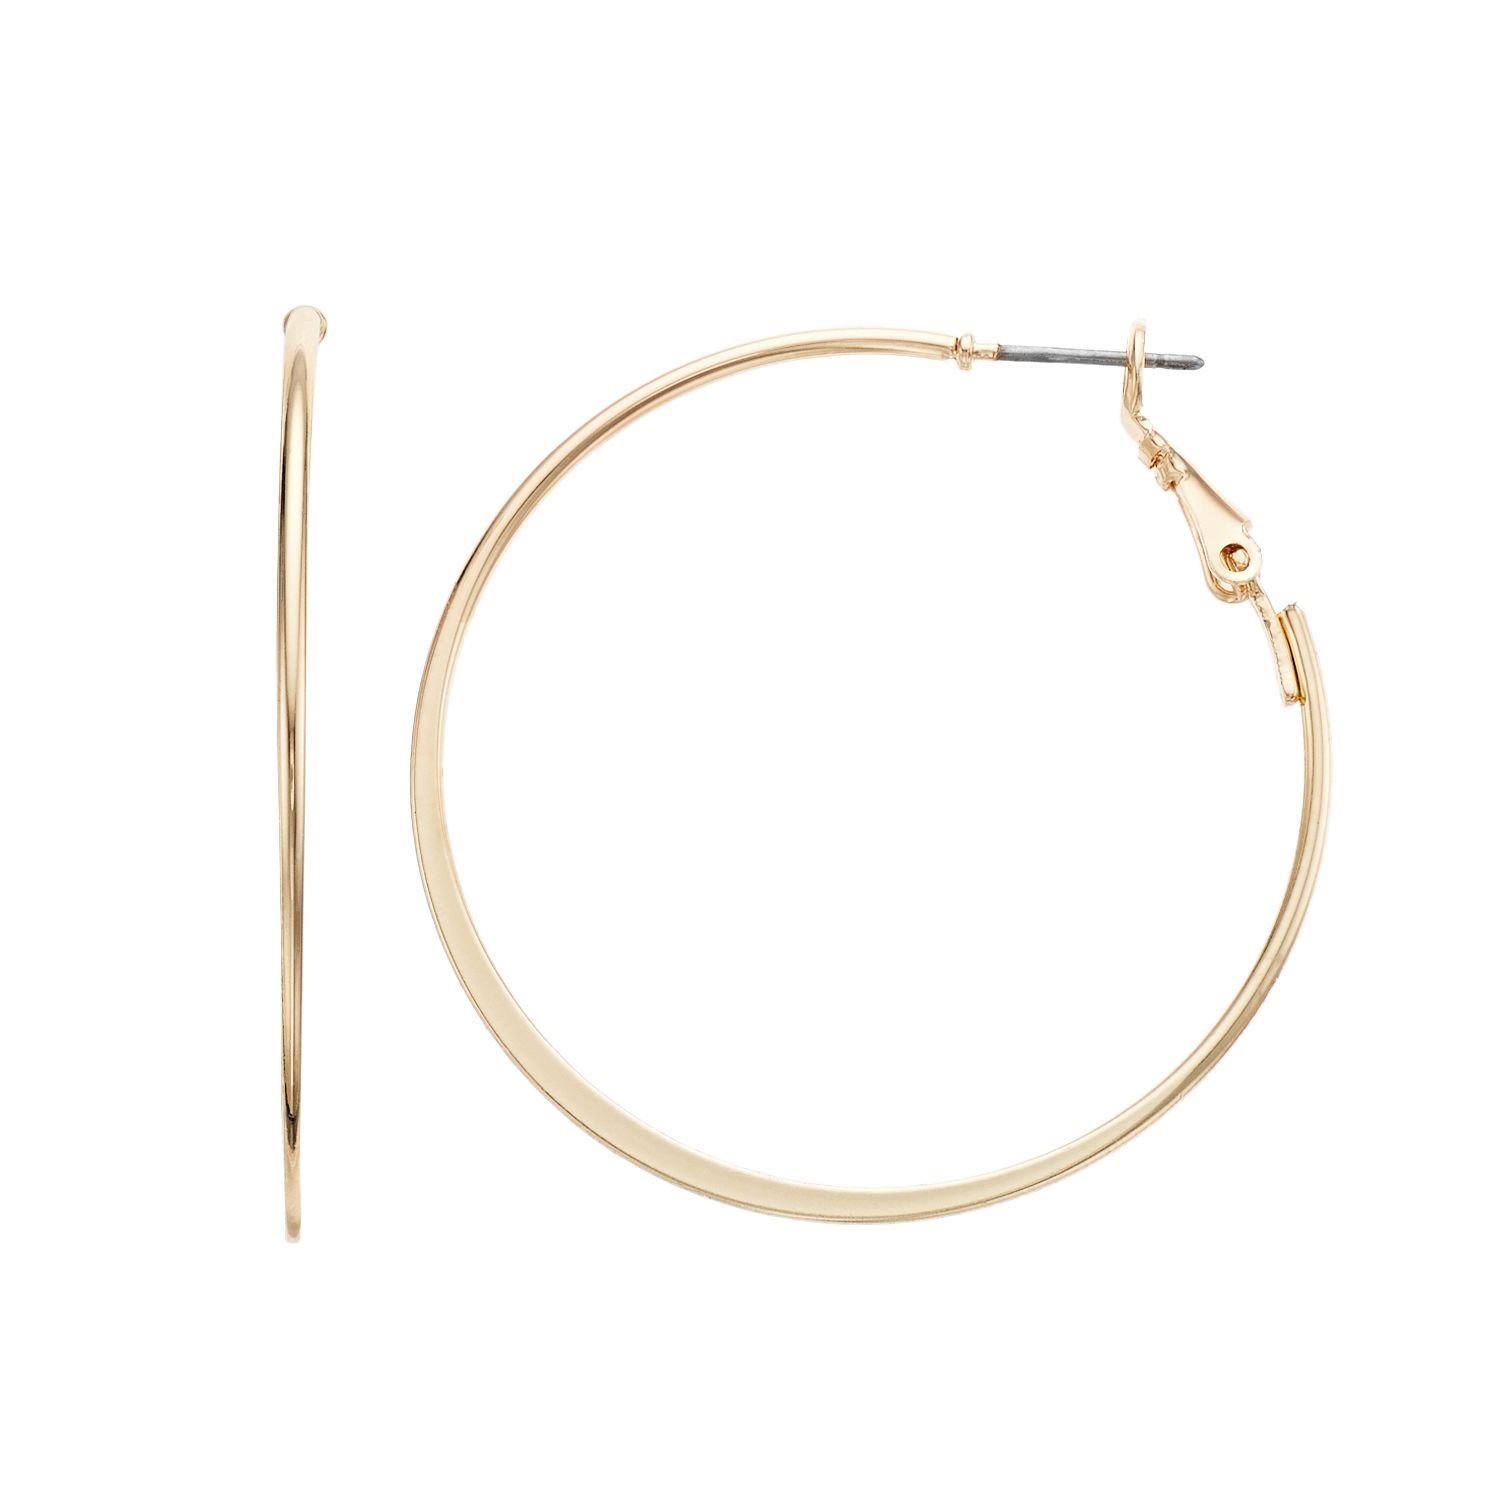 Image for LC Lauren Conrad Classic Hammered Hoop Earrings at Kohl's.